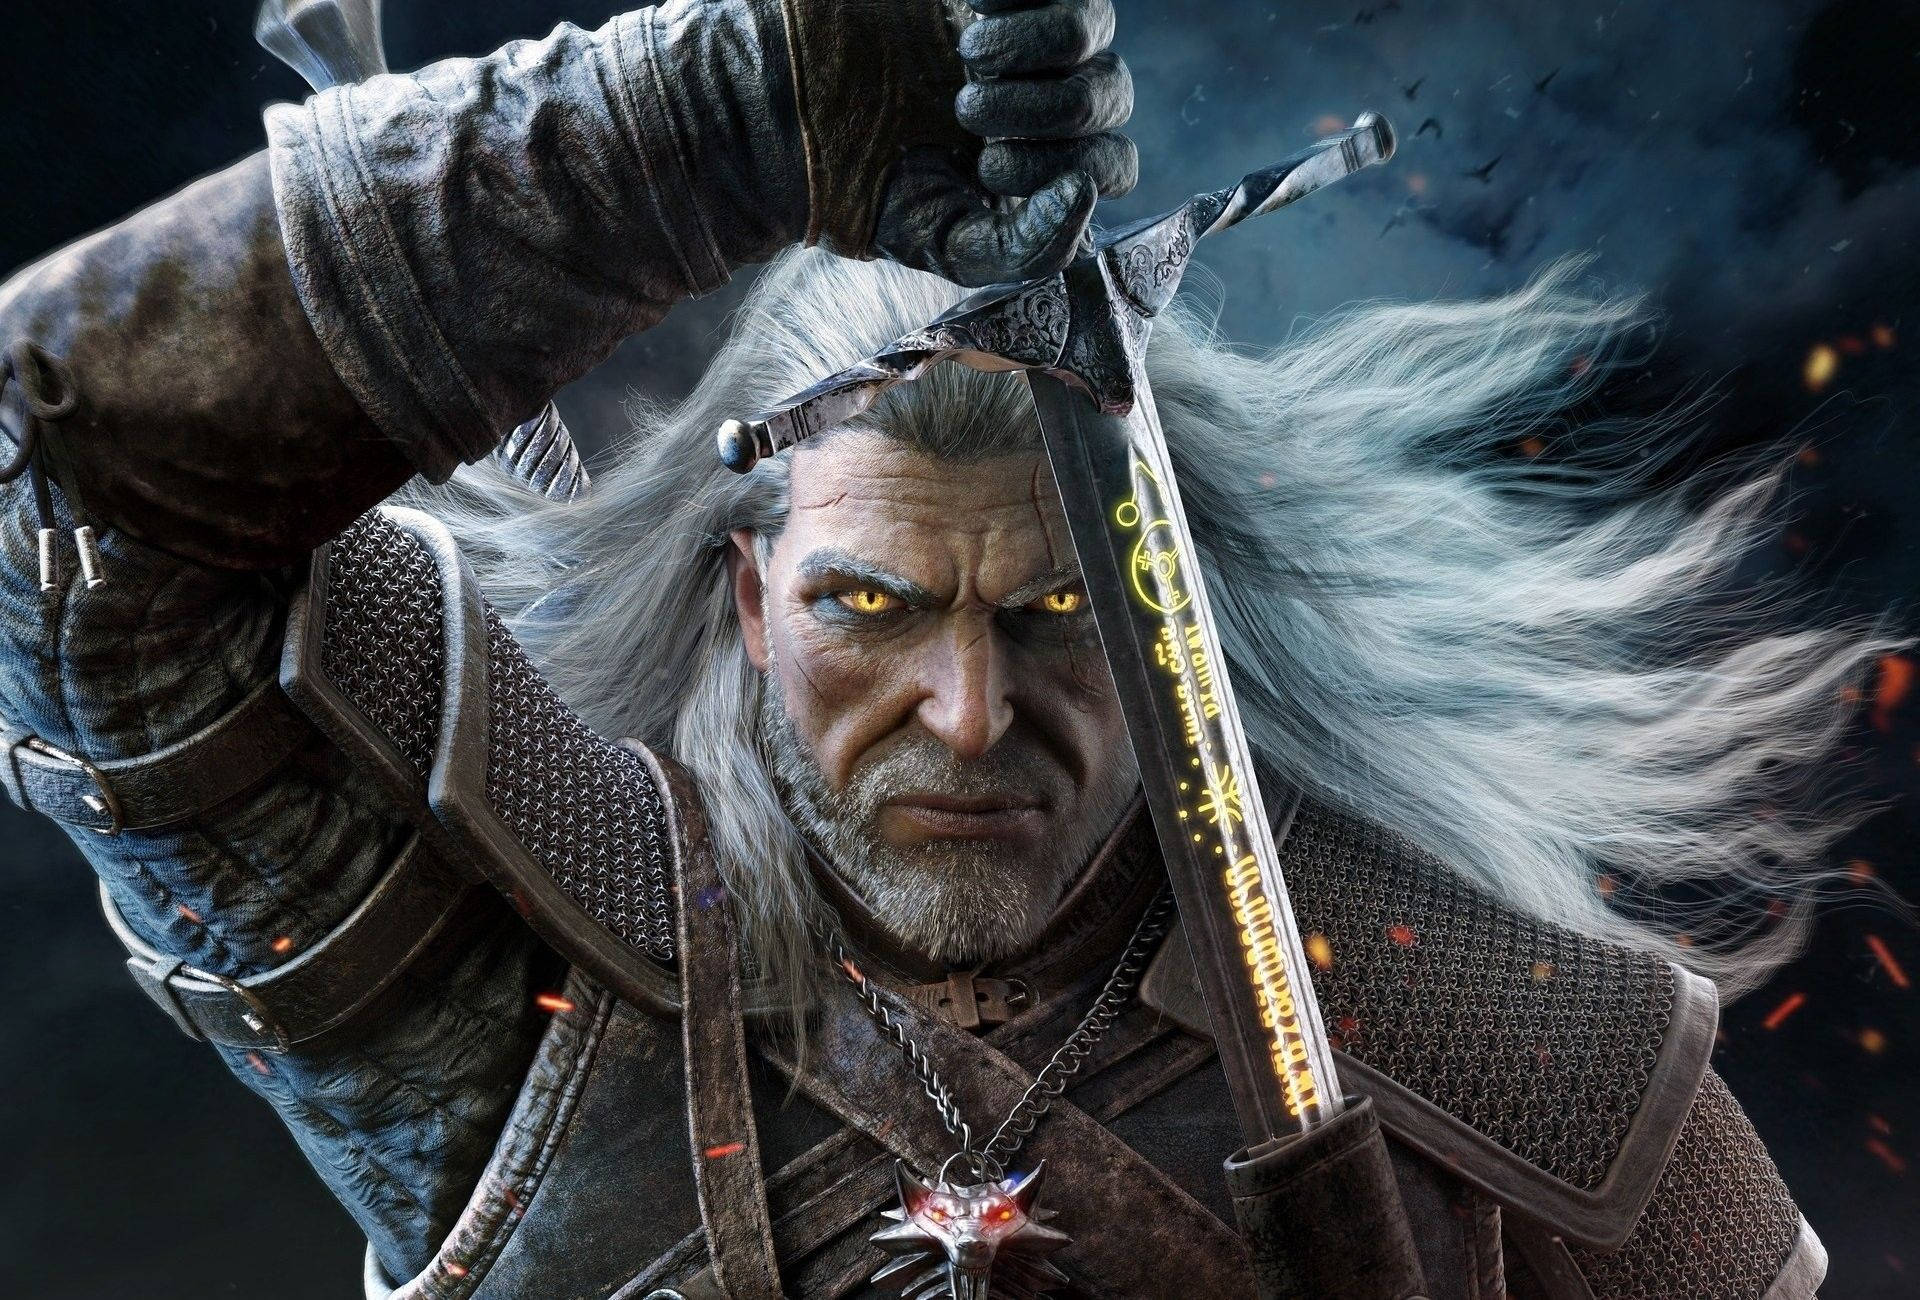 Inspire your legendary journey in The Witcher 3 Wallpaper